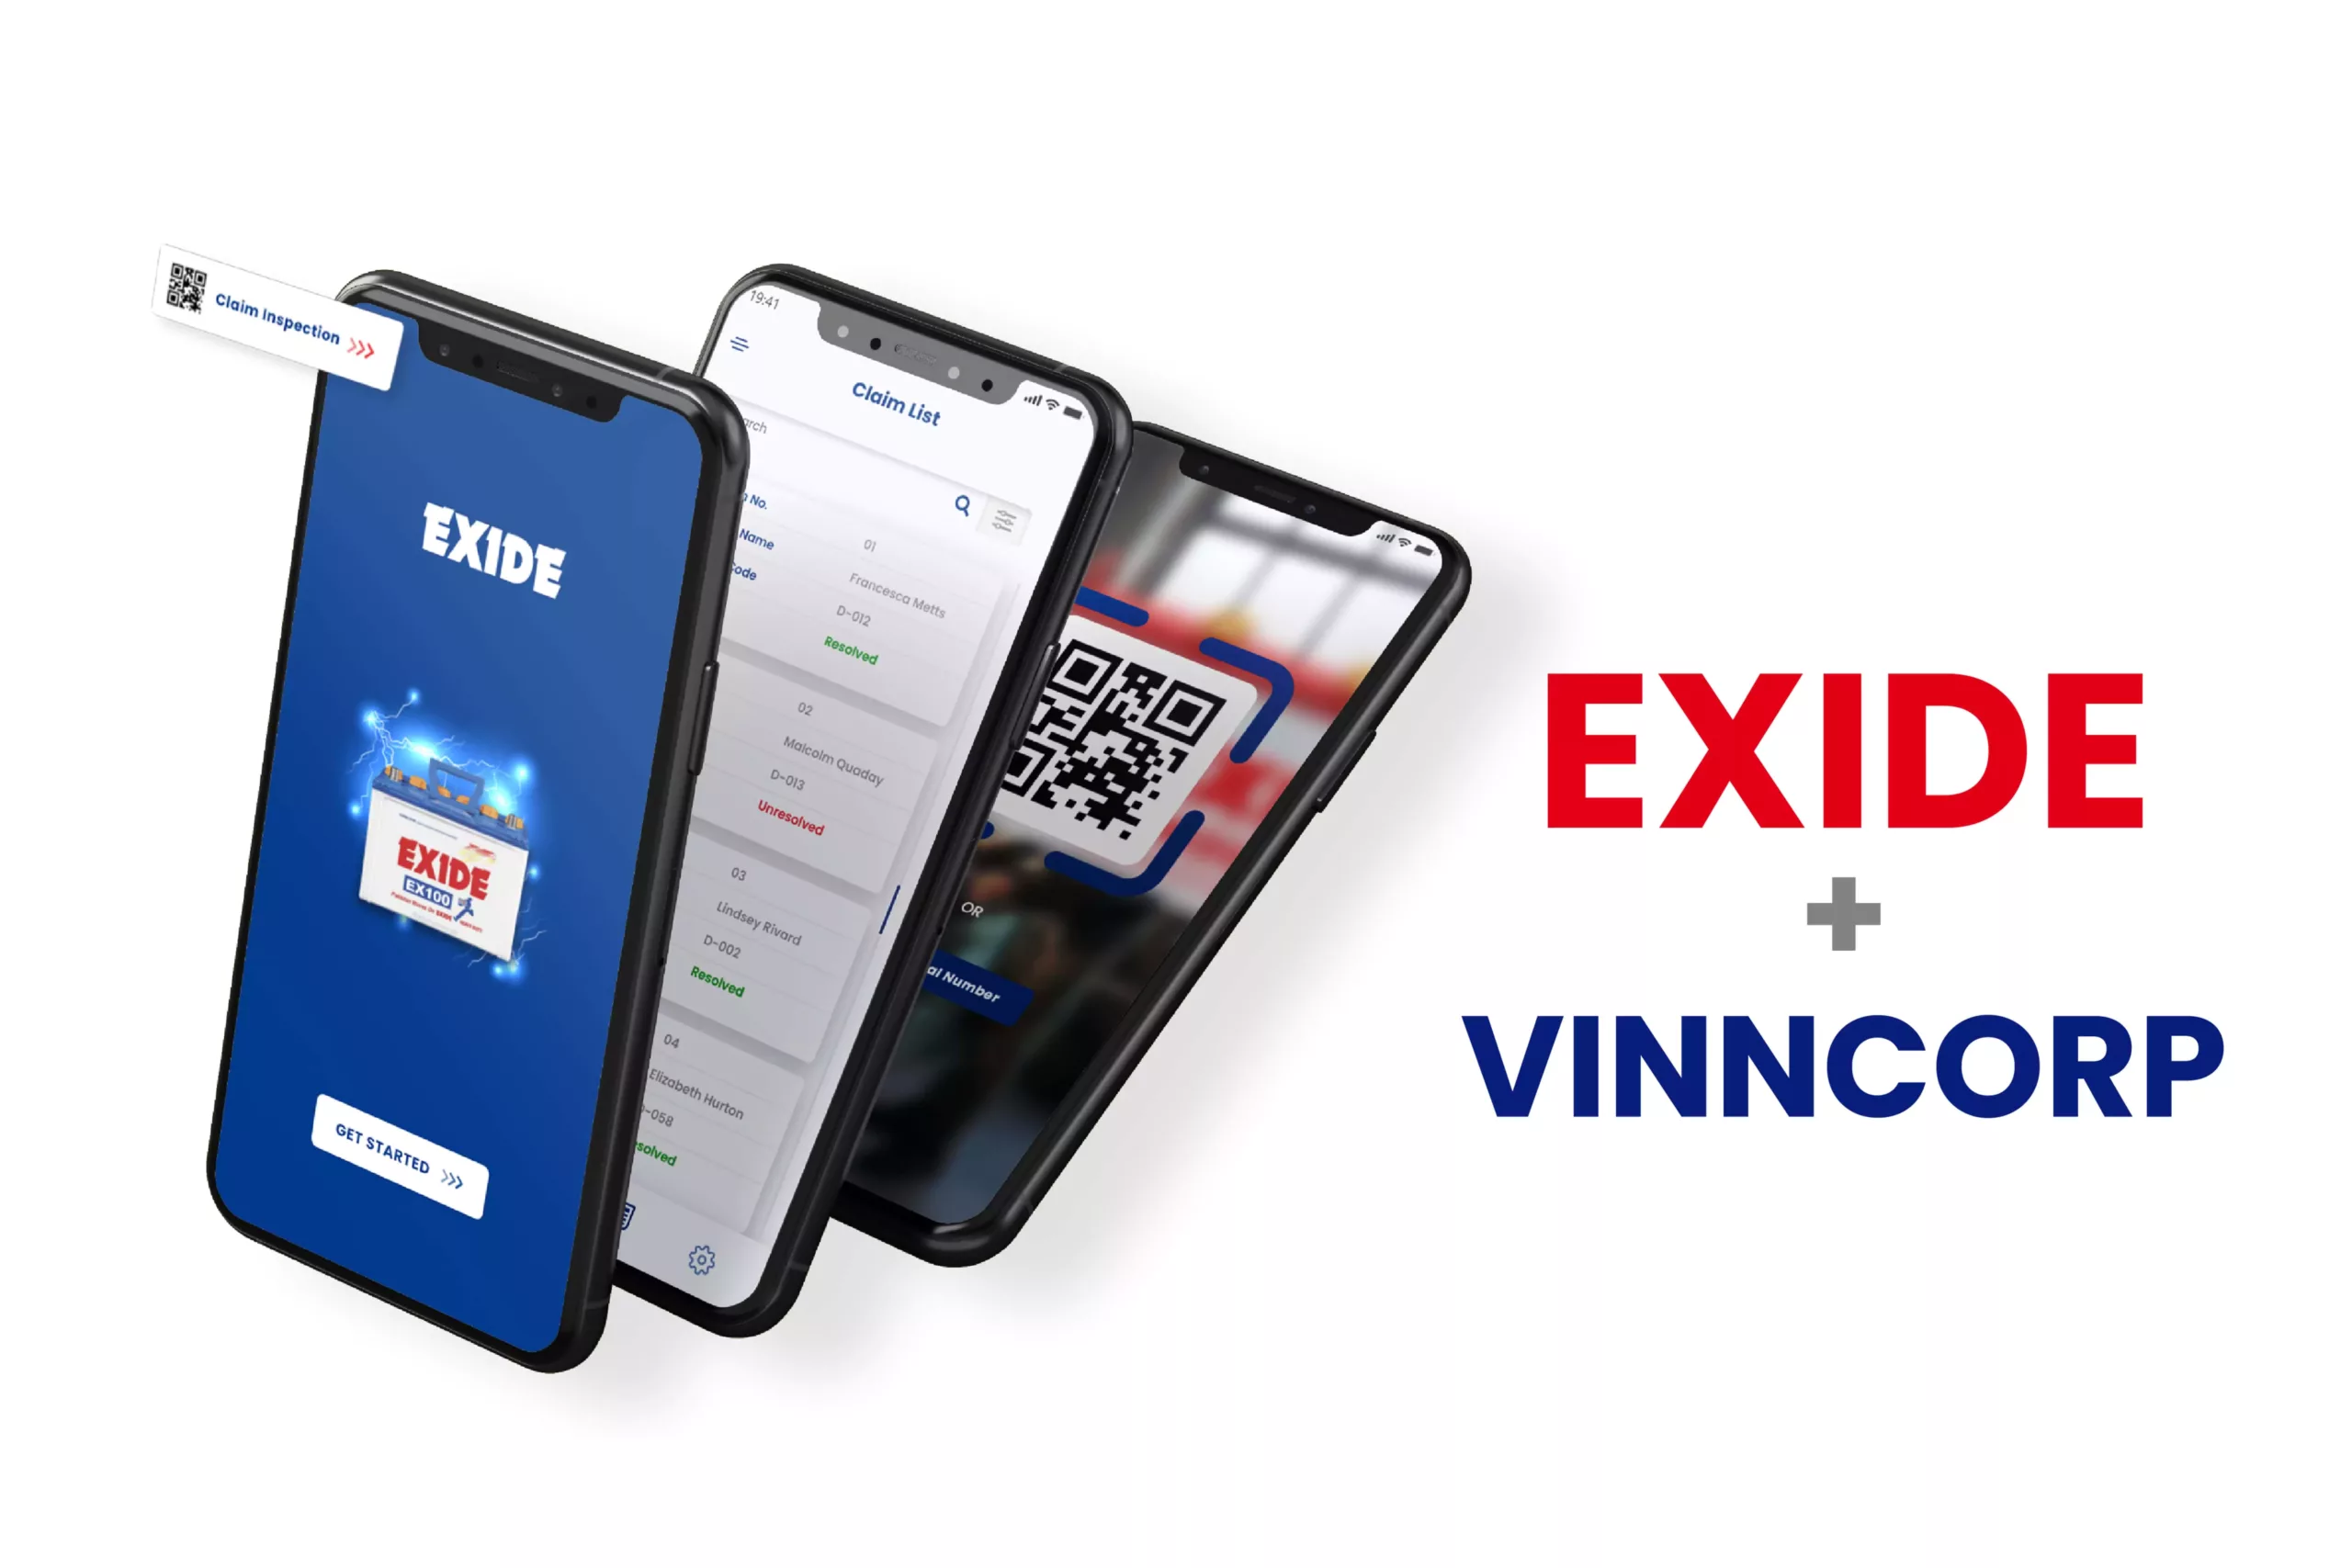 Sending Mockups to Exide, VinnCorp Updated Them Every Step of the Way